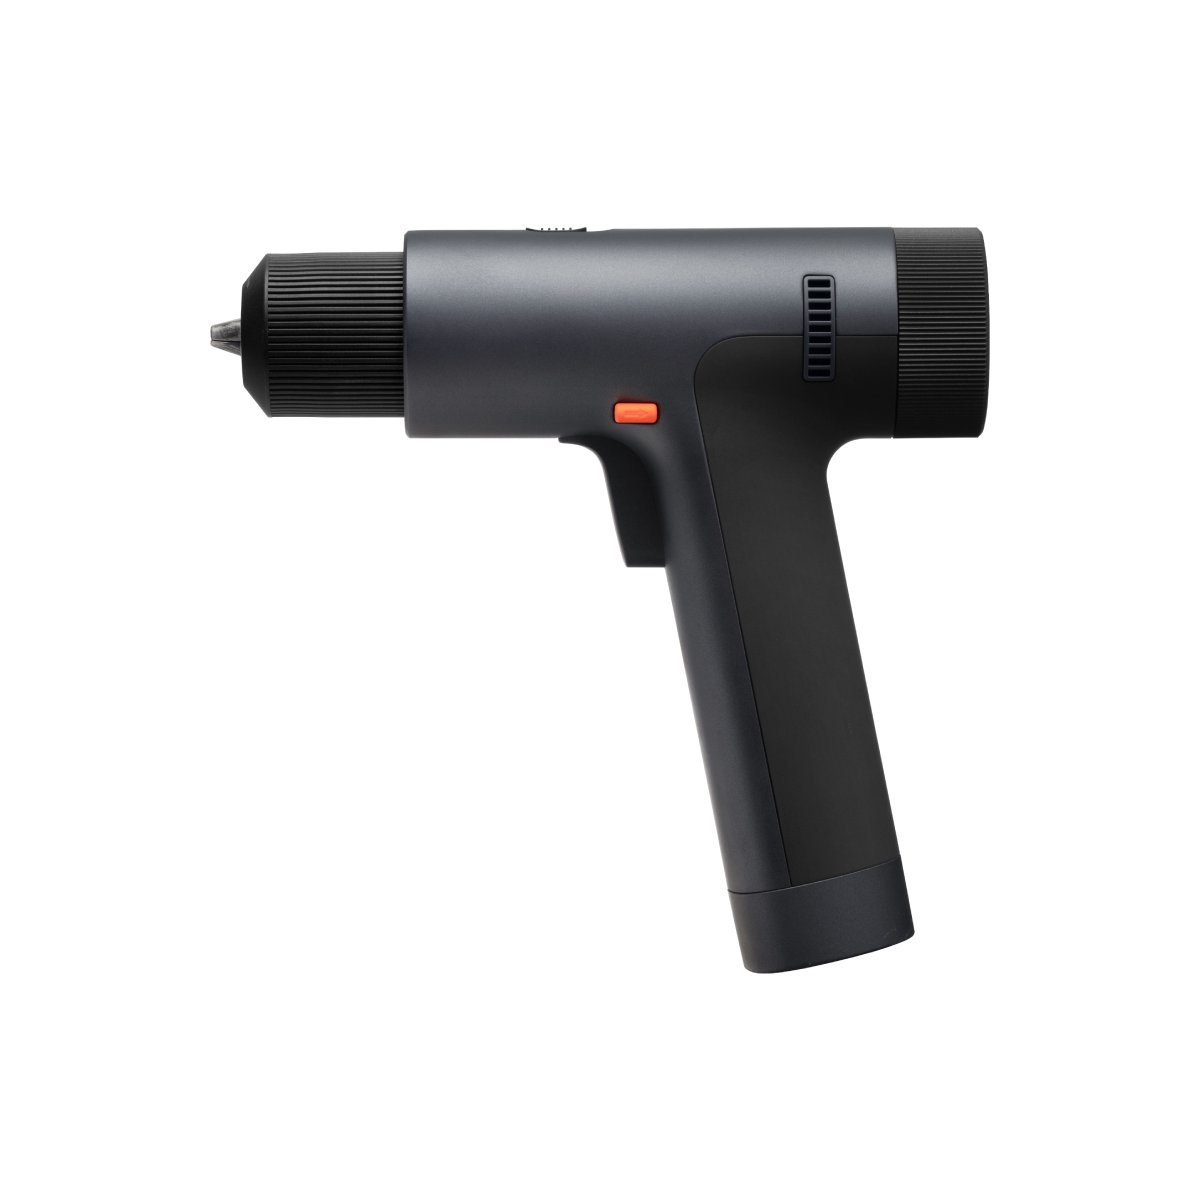 Xiaomi 12V Max Brushless Cordless Drill, , large image number 1